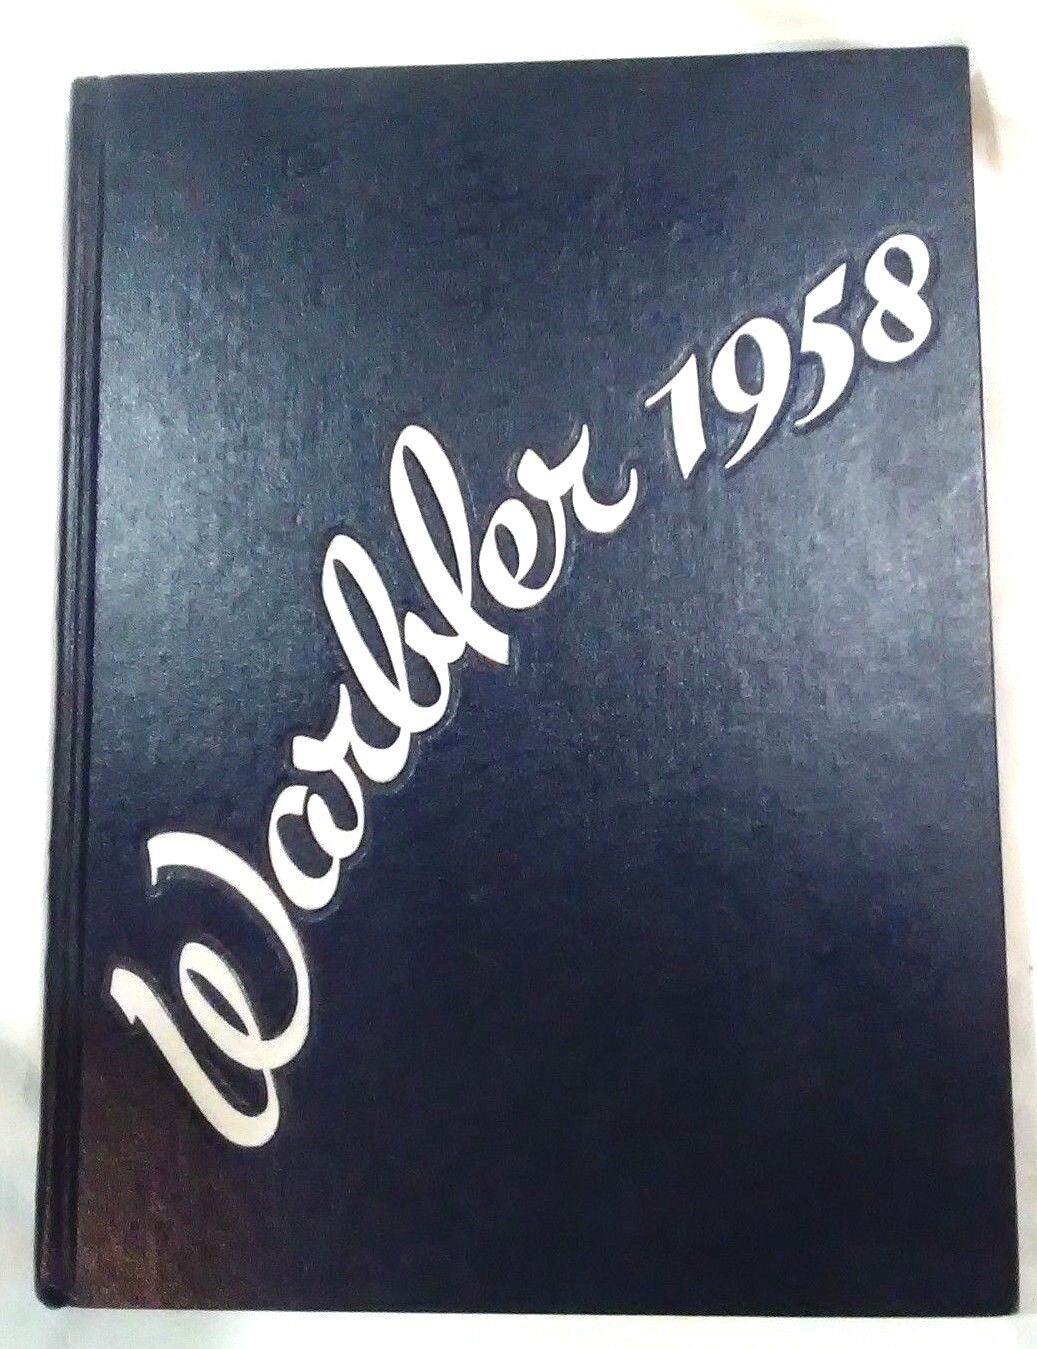 Eastern Illinois University 1958 Warbler Yearbook, Lots of Autographs